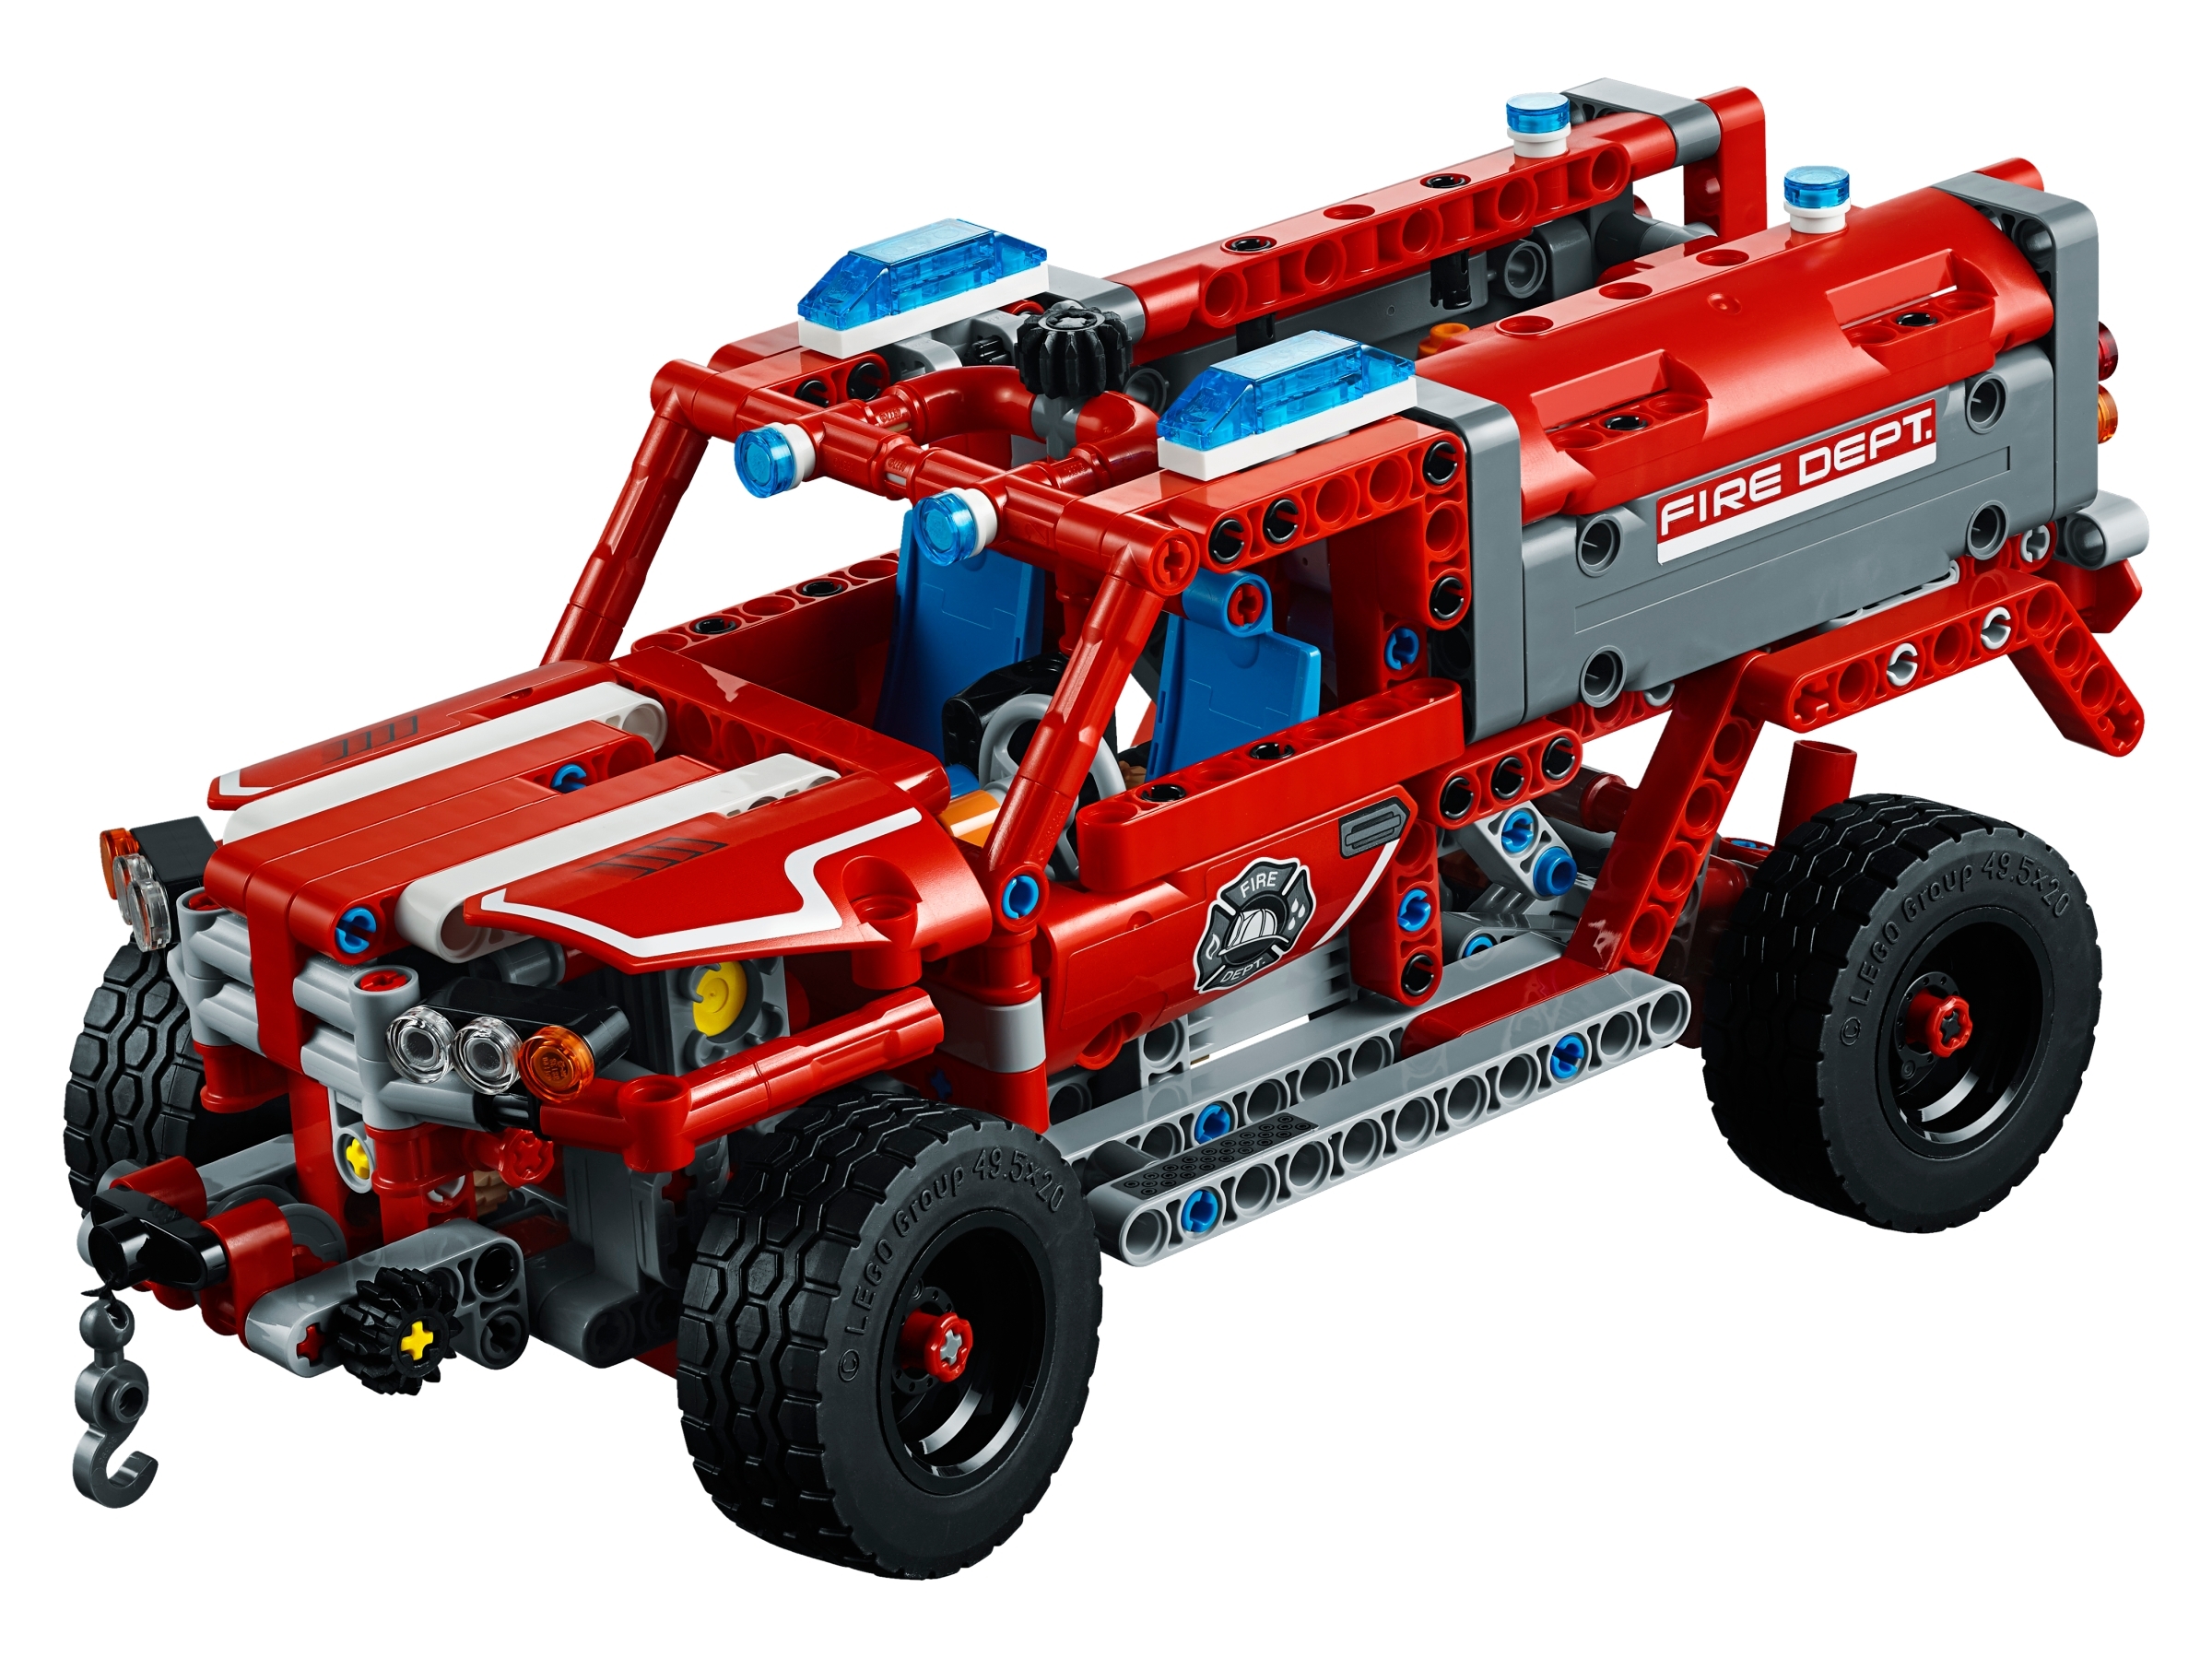 First Responder 42075 | Technic™ | Buy online at the Official LEGO® Shop CA